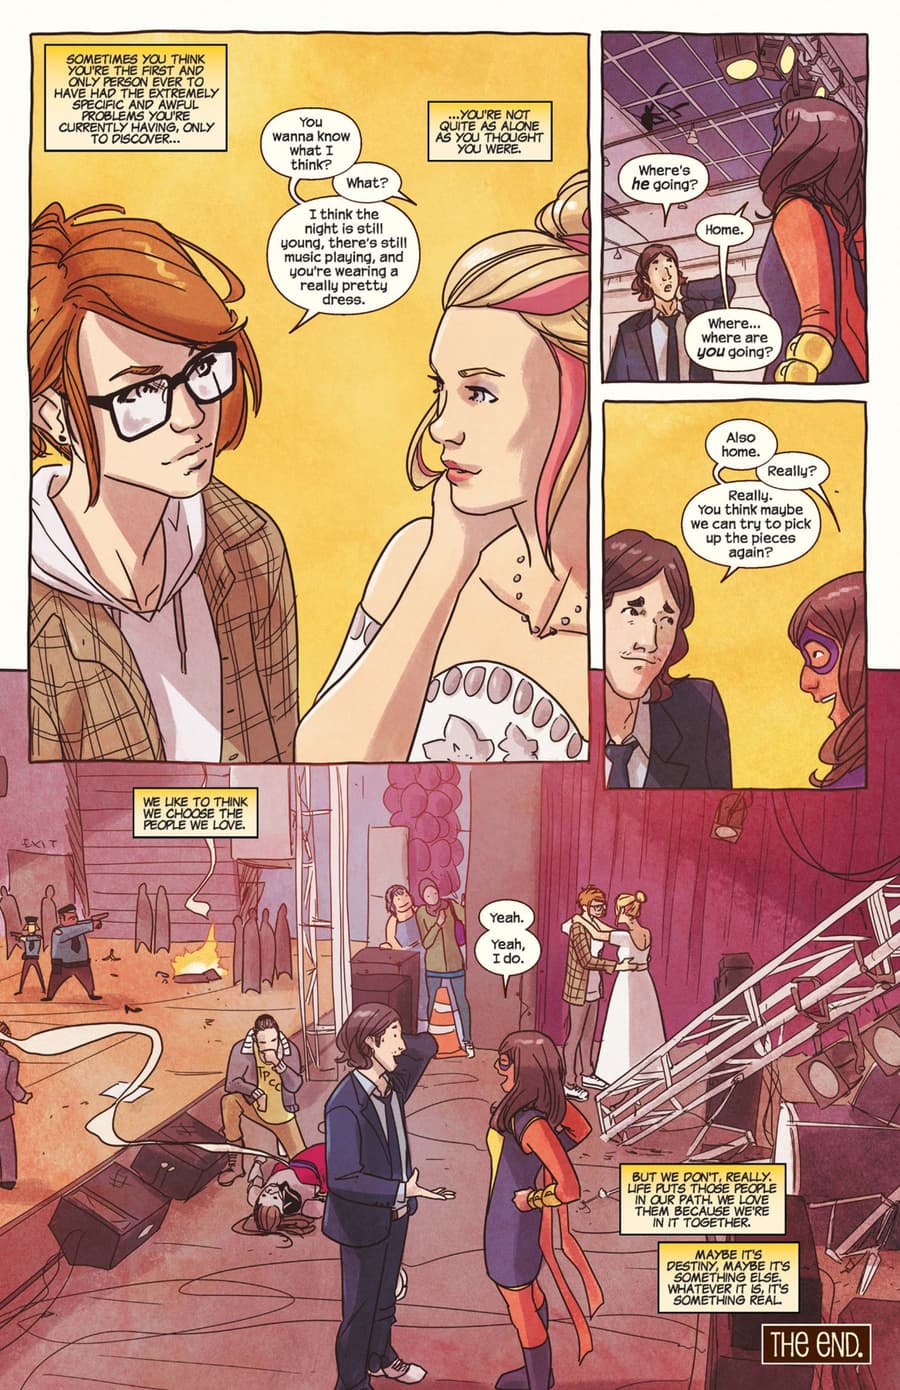 MS. MARVEL (2015) #30 page by G. Willow Wilson and Nico Leon